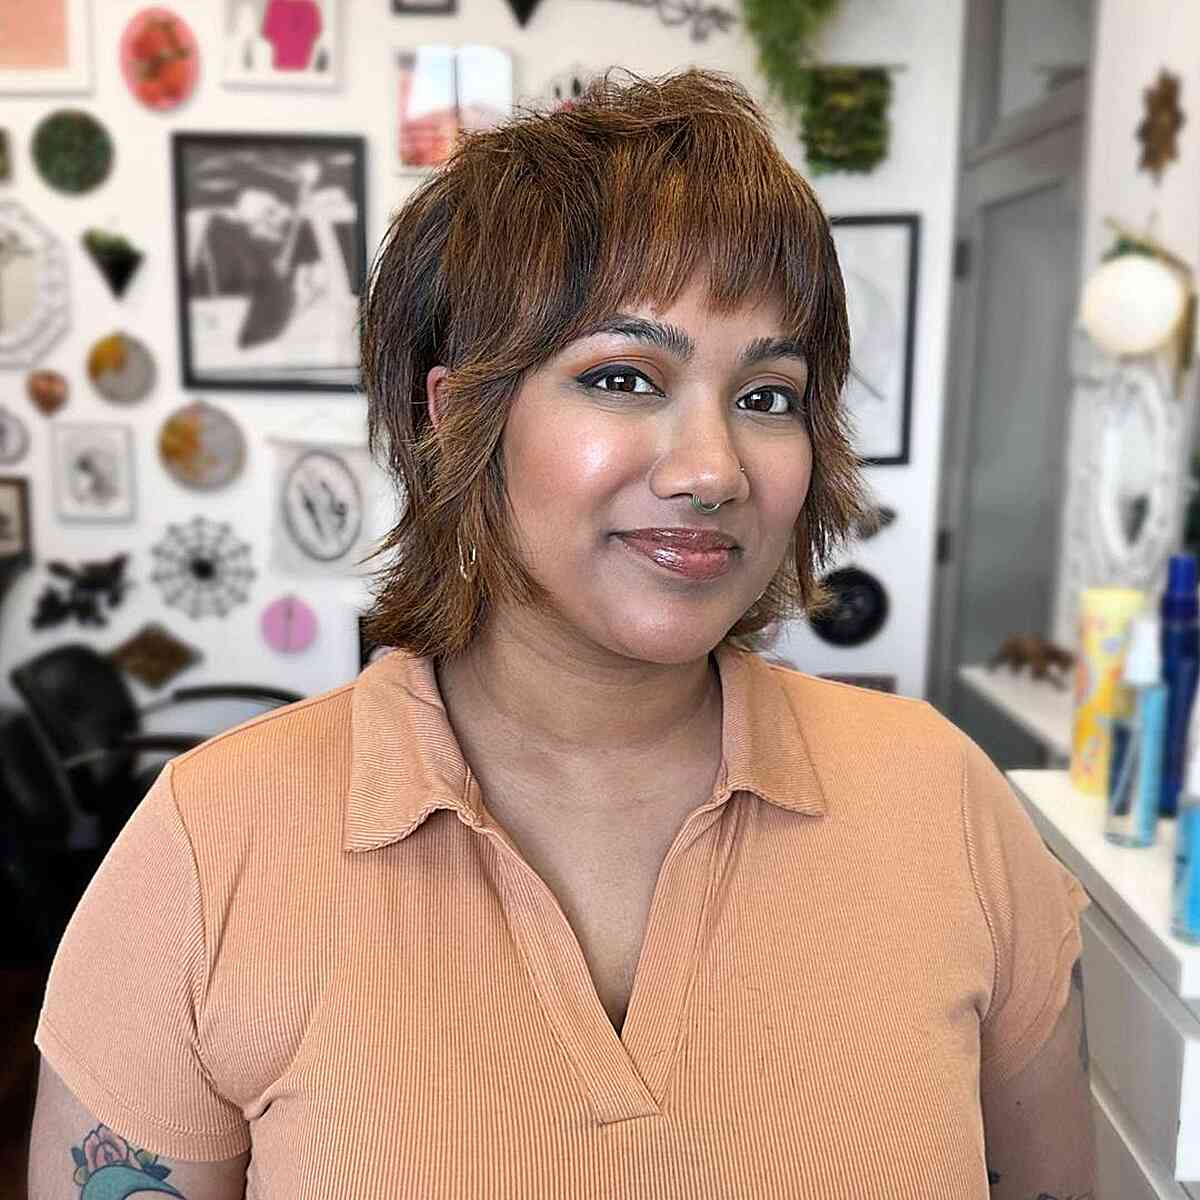 Highlights on a Mini Shaggy Mullet for Women